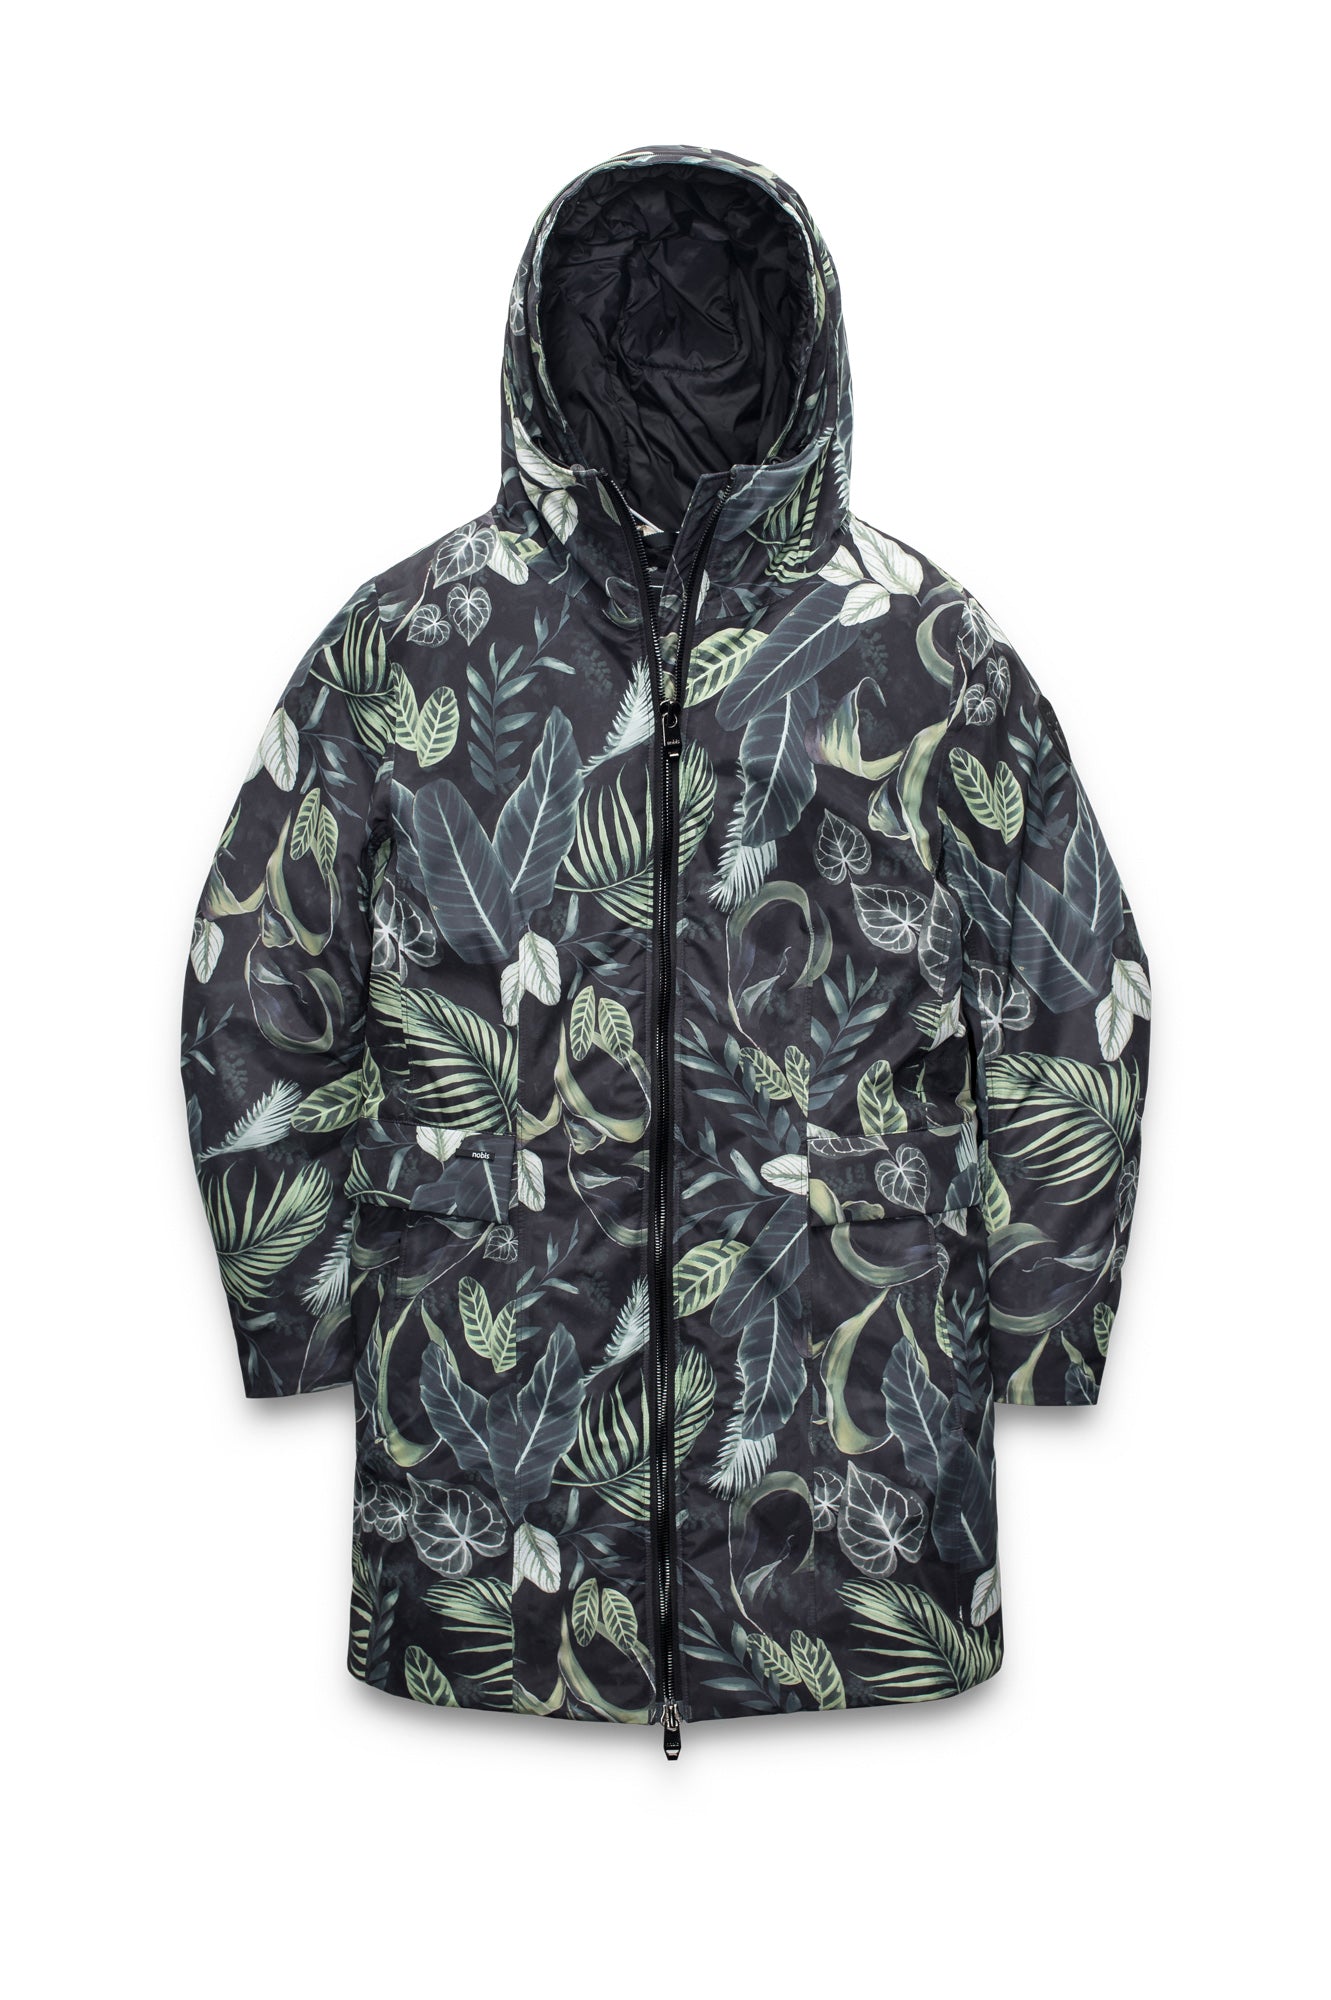 Romeda Furless Ladies Mid Thigh Parka in thigh length, Canadian duck down insulation, non-removable hood, and two-way front zipper, in Foliage